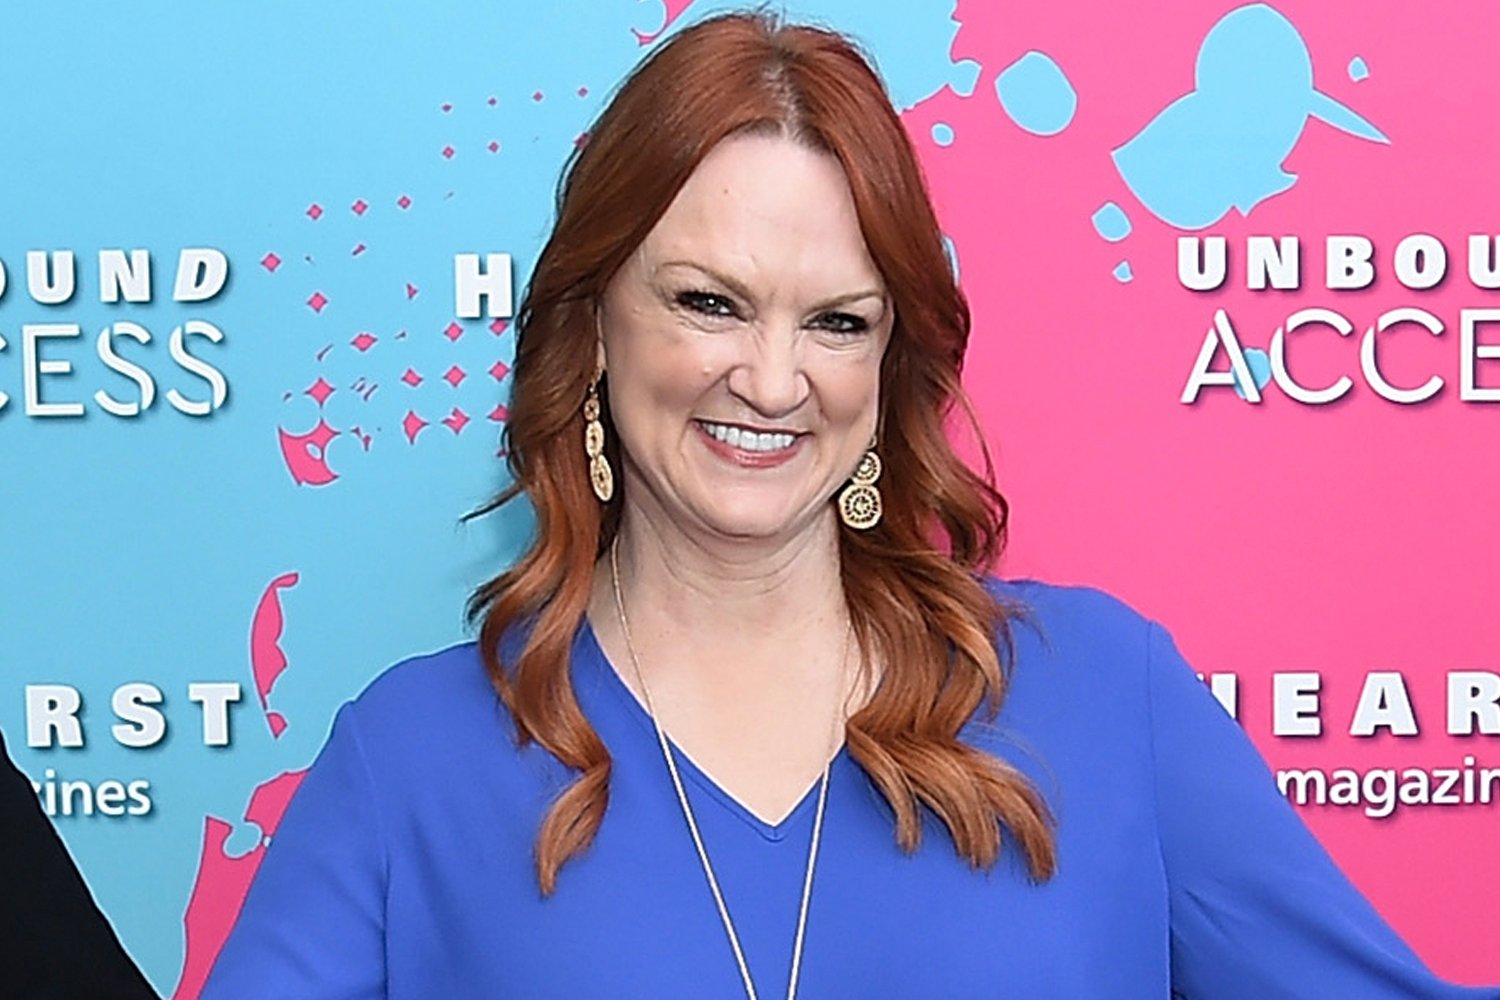 Ree Drummond smiling during an event